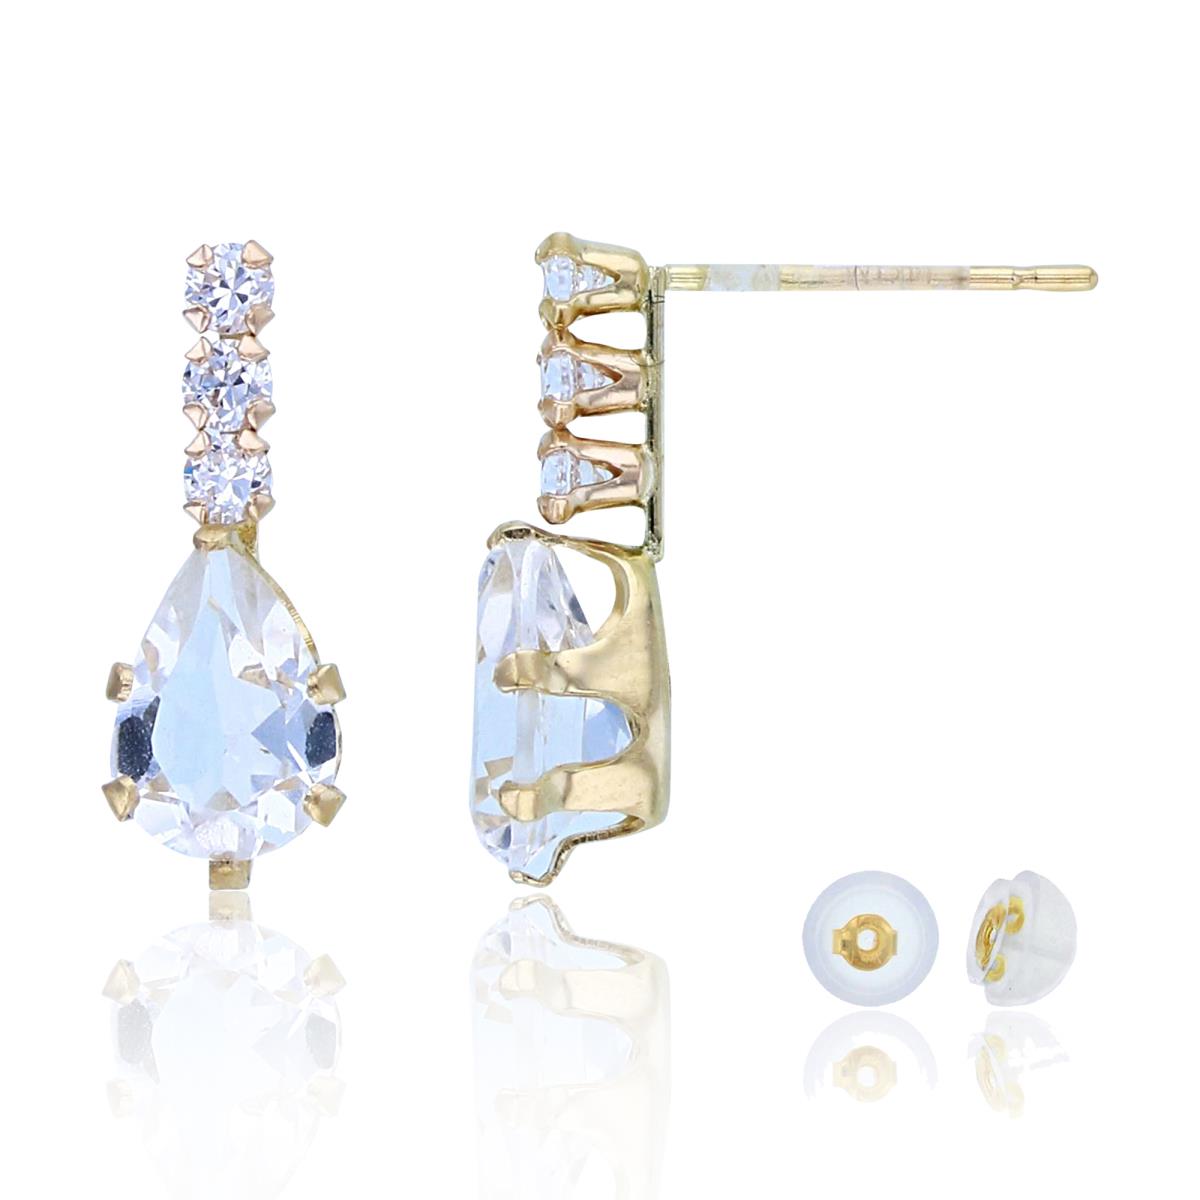 10K Yellow Gold 7x5mm PS & Rnd CZ  Stud Earrings with Silicon Backs